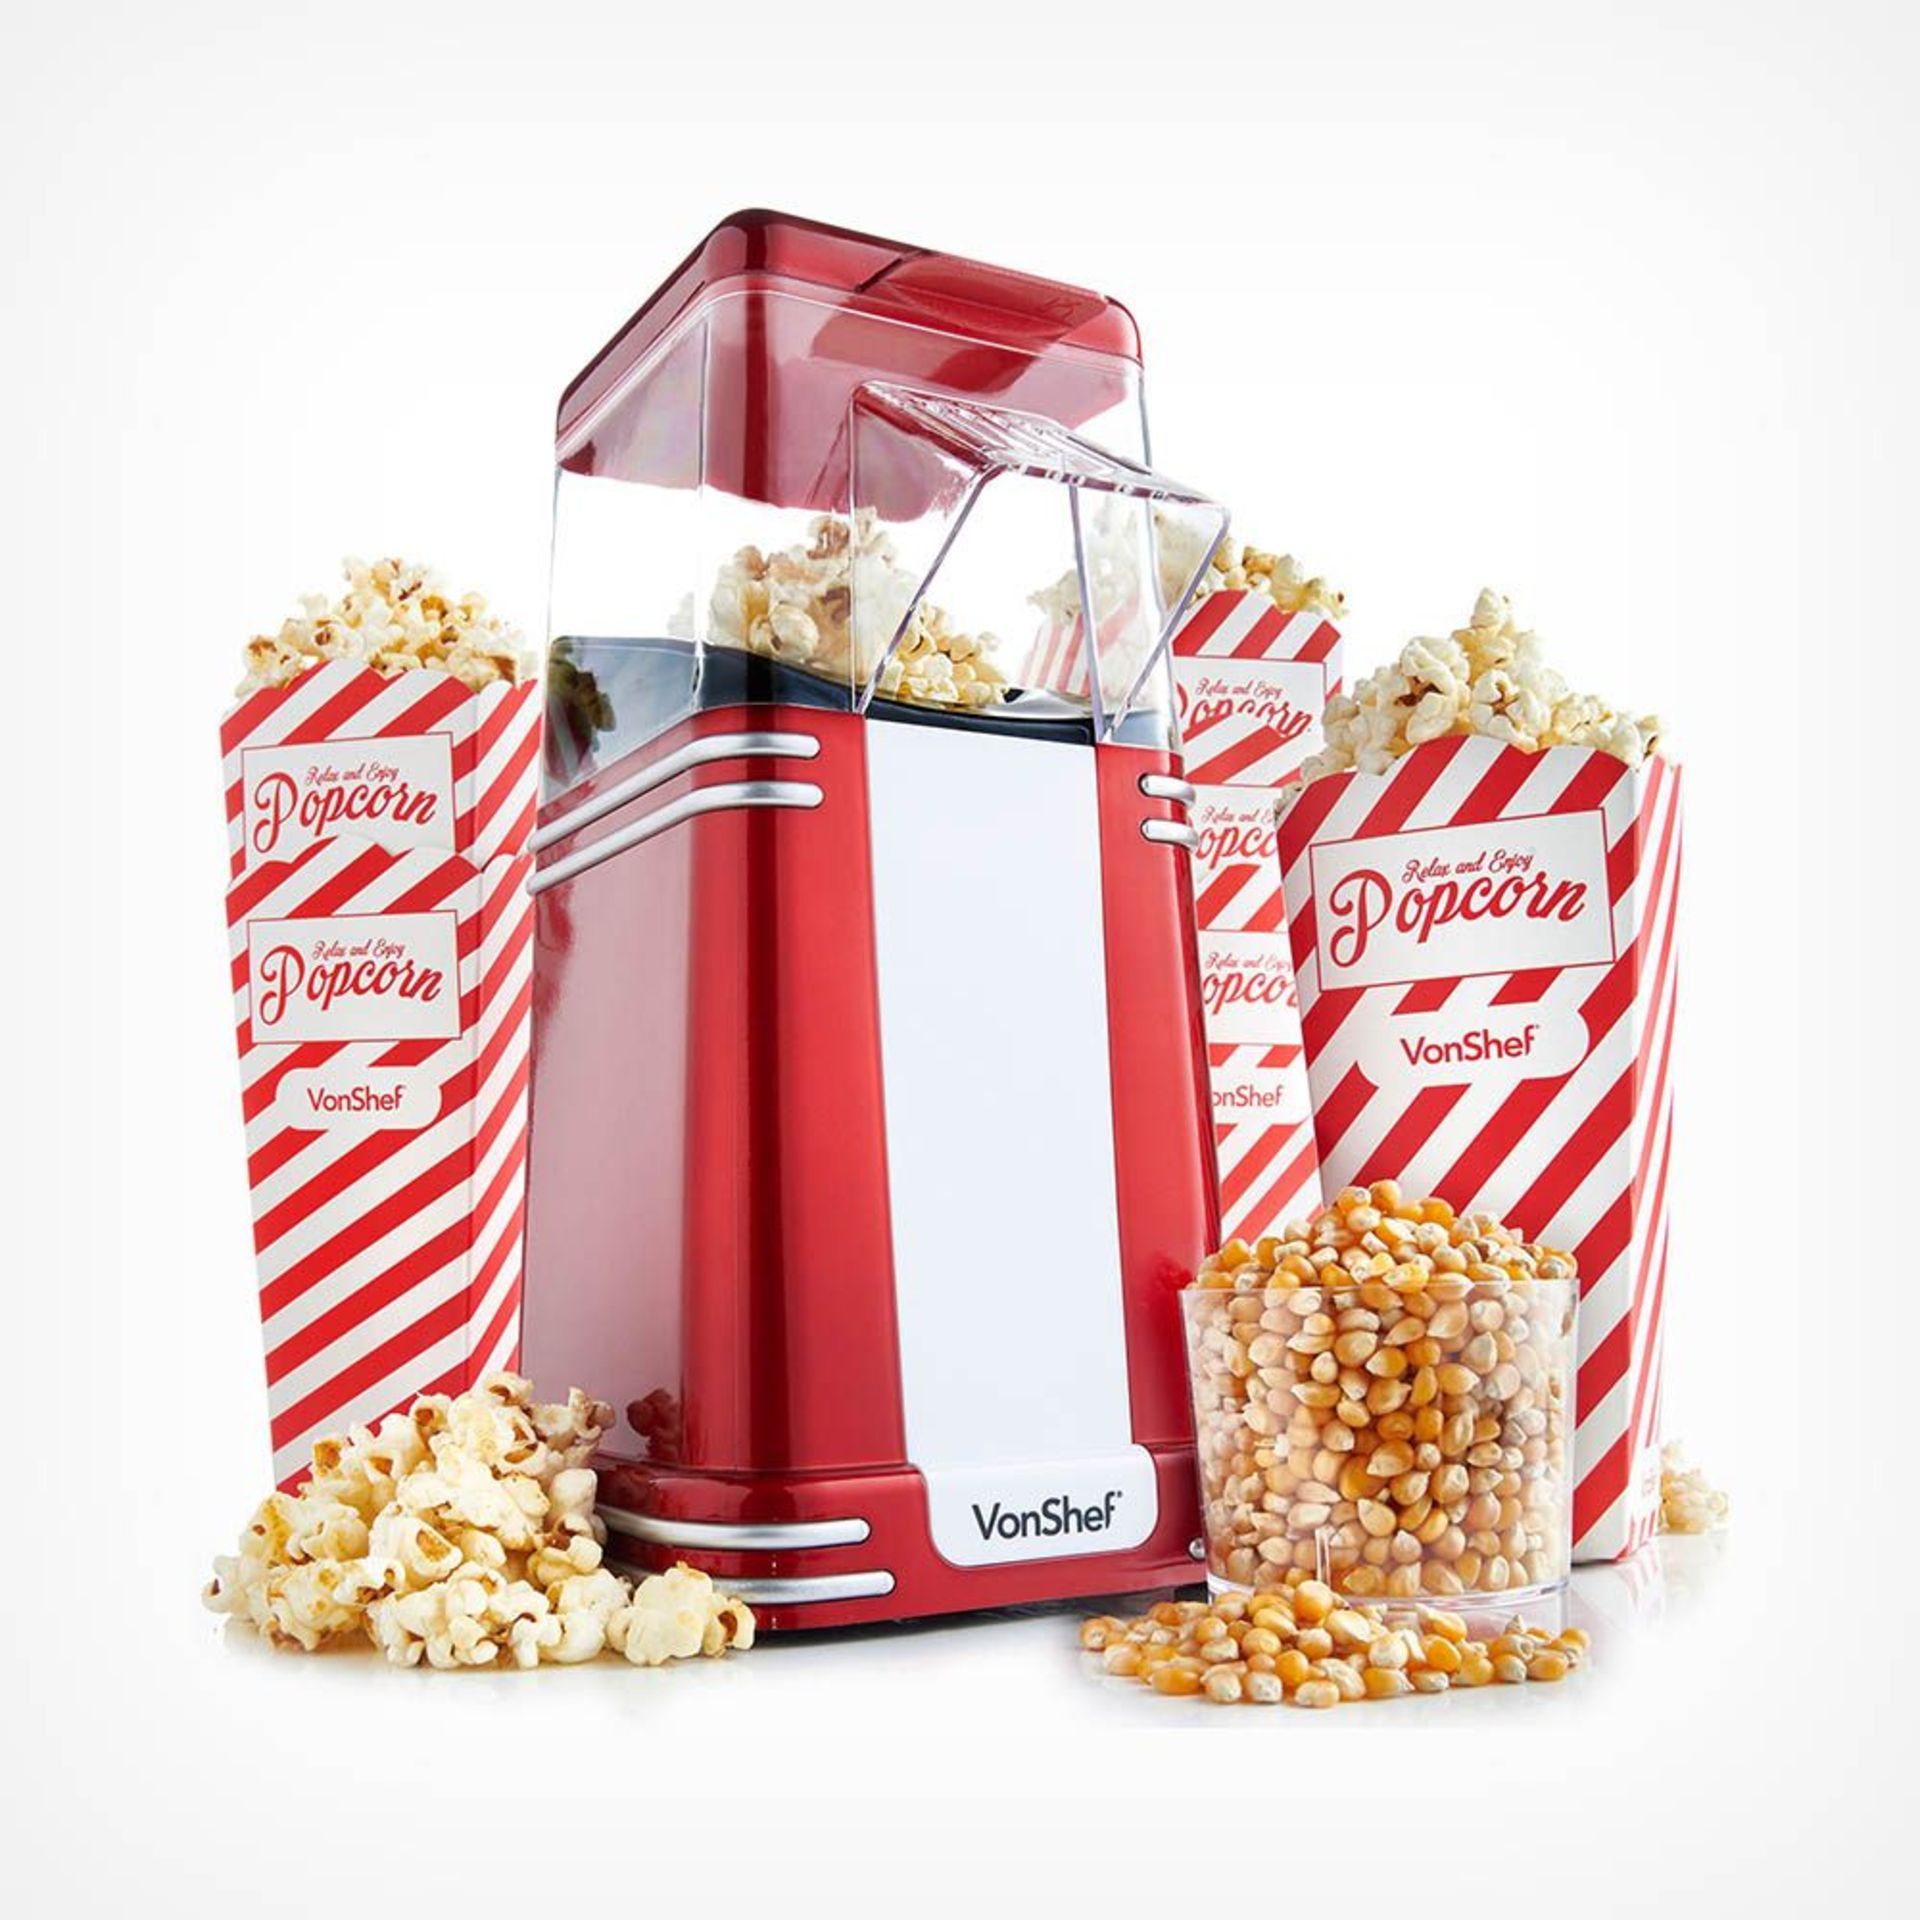 Retro Popcorn Maker. - BI. Perfect for movie nights, house parties or whenever you fancy a sweet